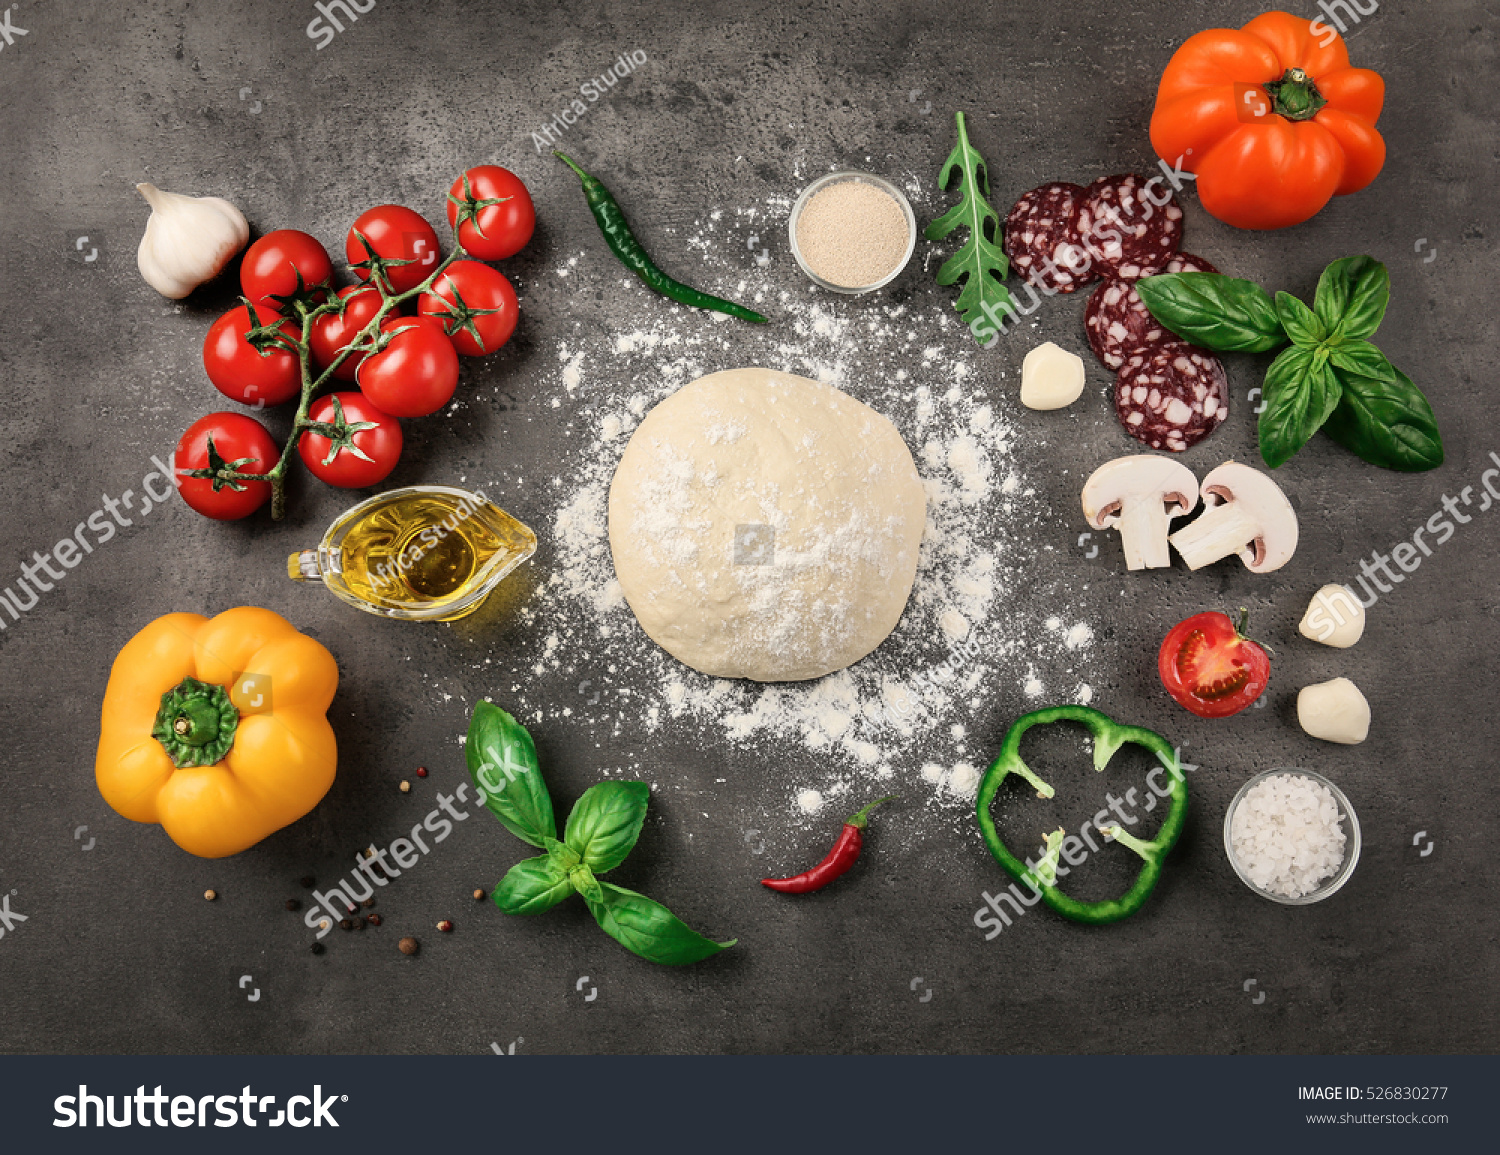 Raw dough for pizza with ingredients and spices on table #526830277